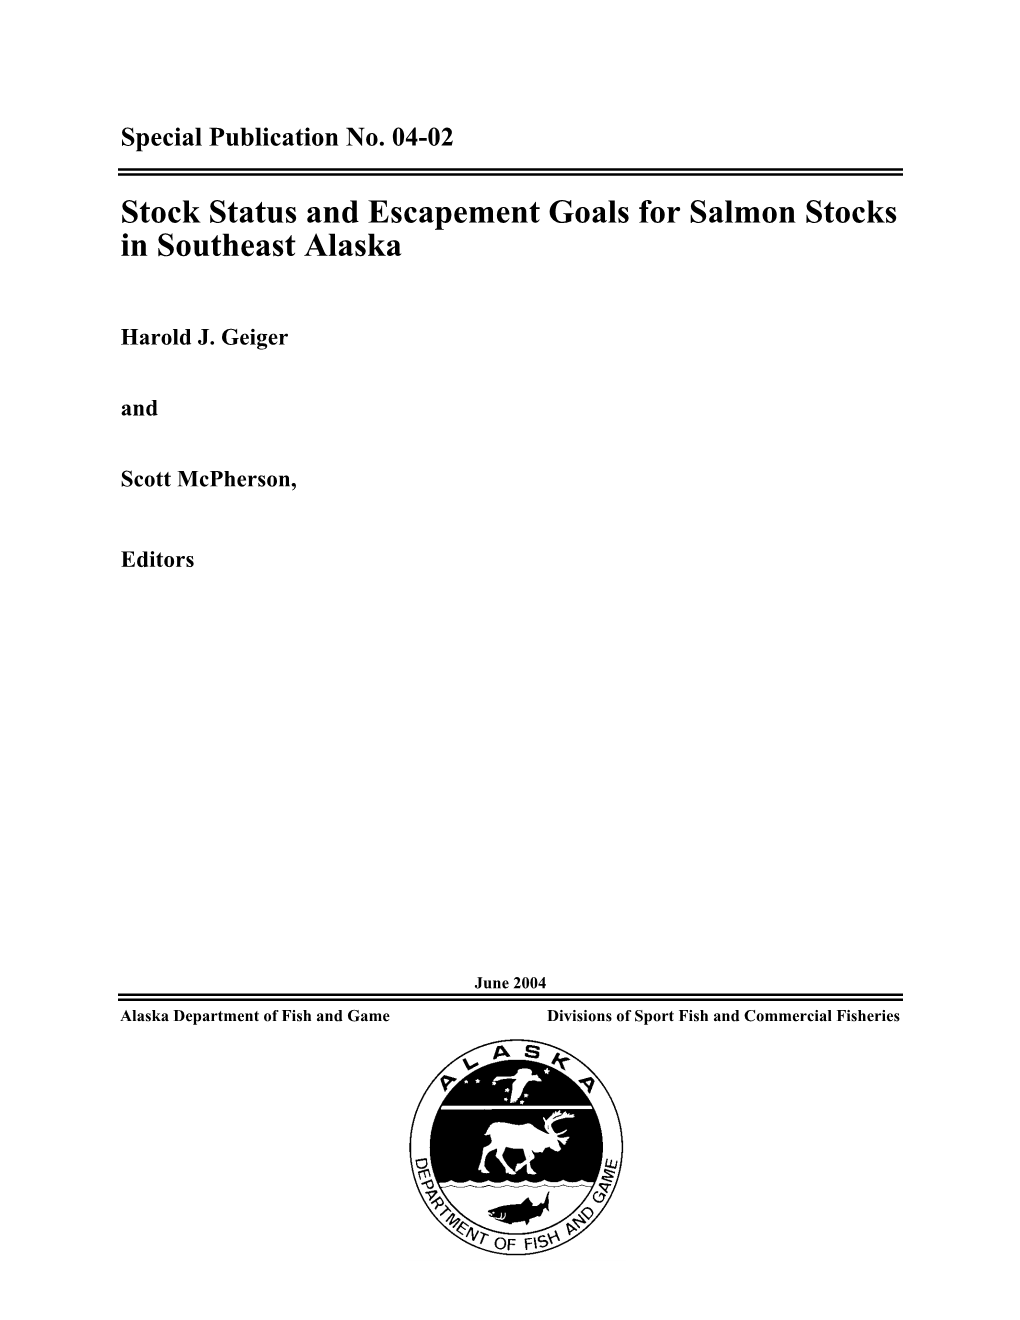 Stock Status and Escapement Goals for Salmon Stocks in Southeast Alaska